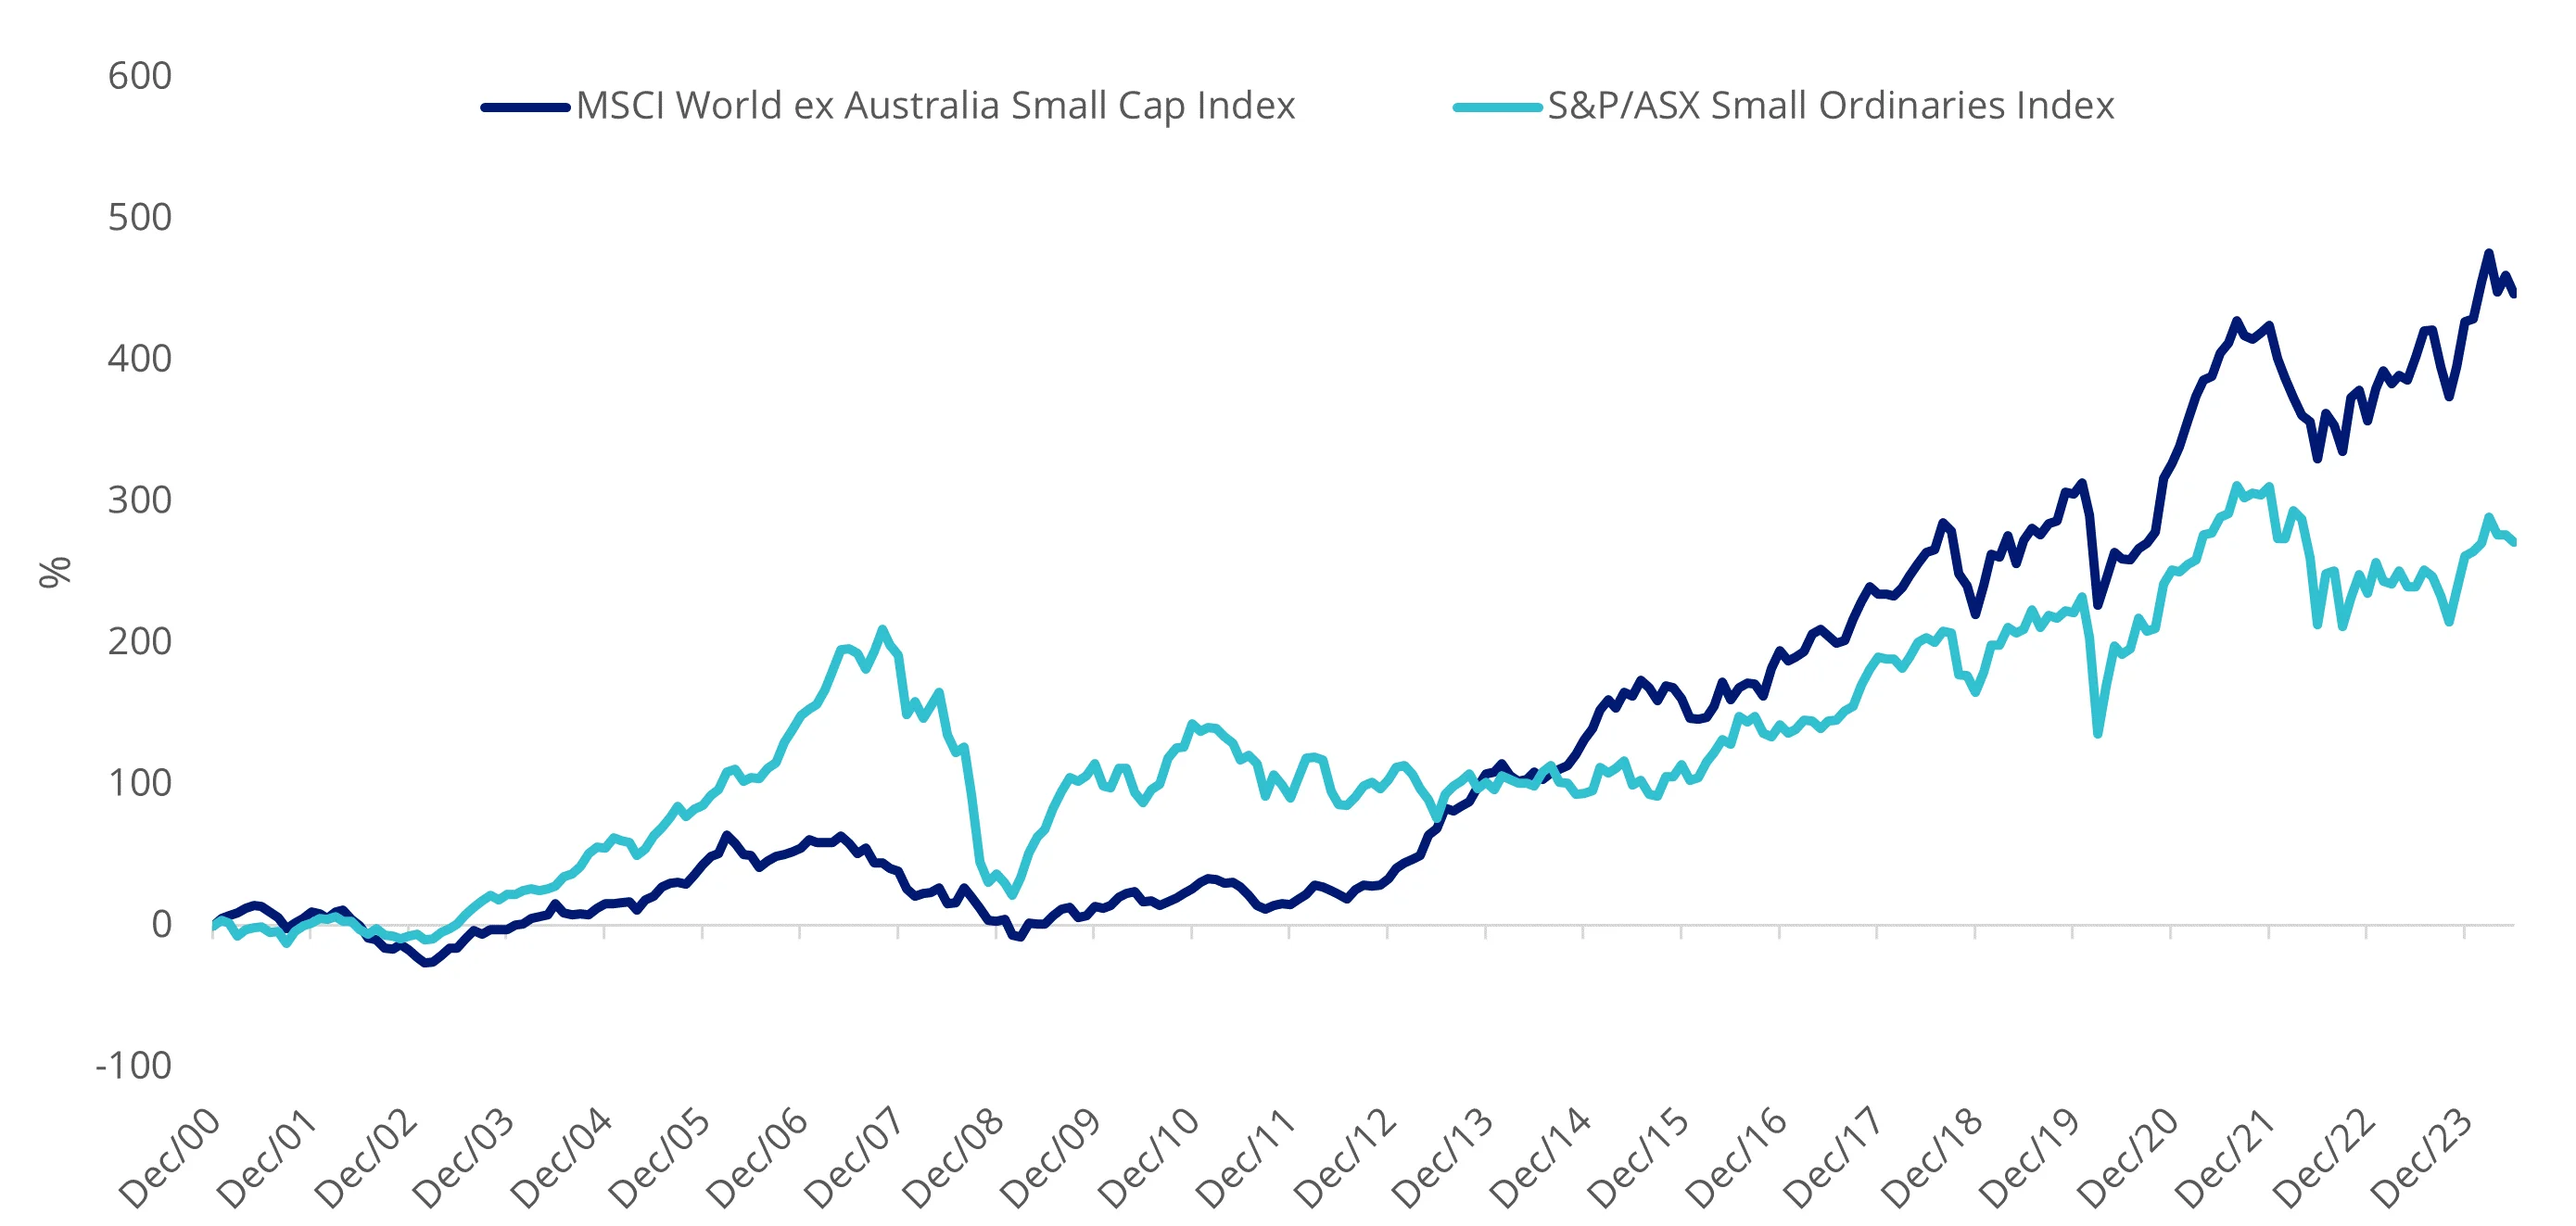 International small companies have outperformed Australian small companies